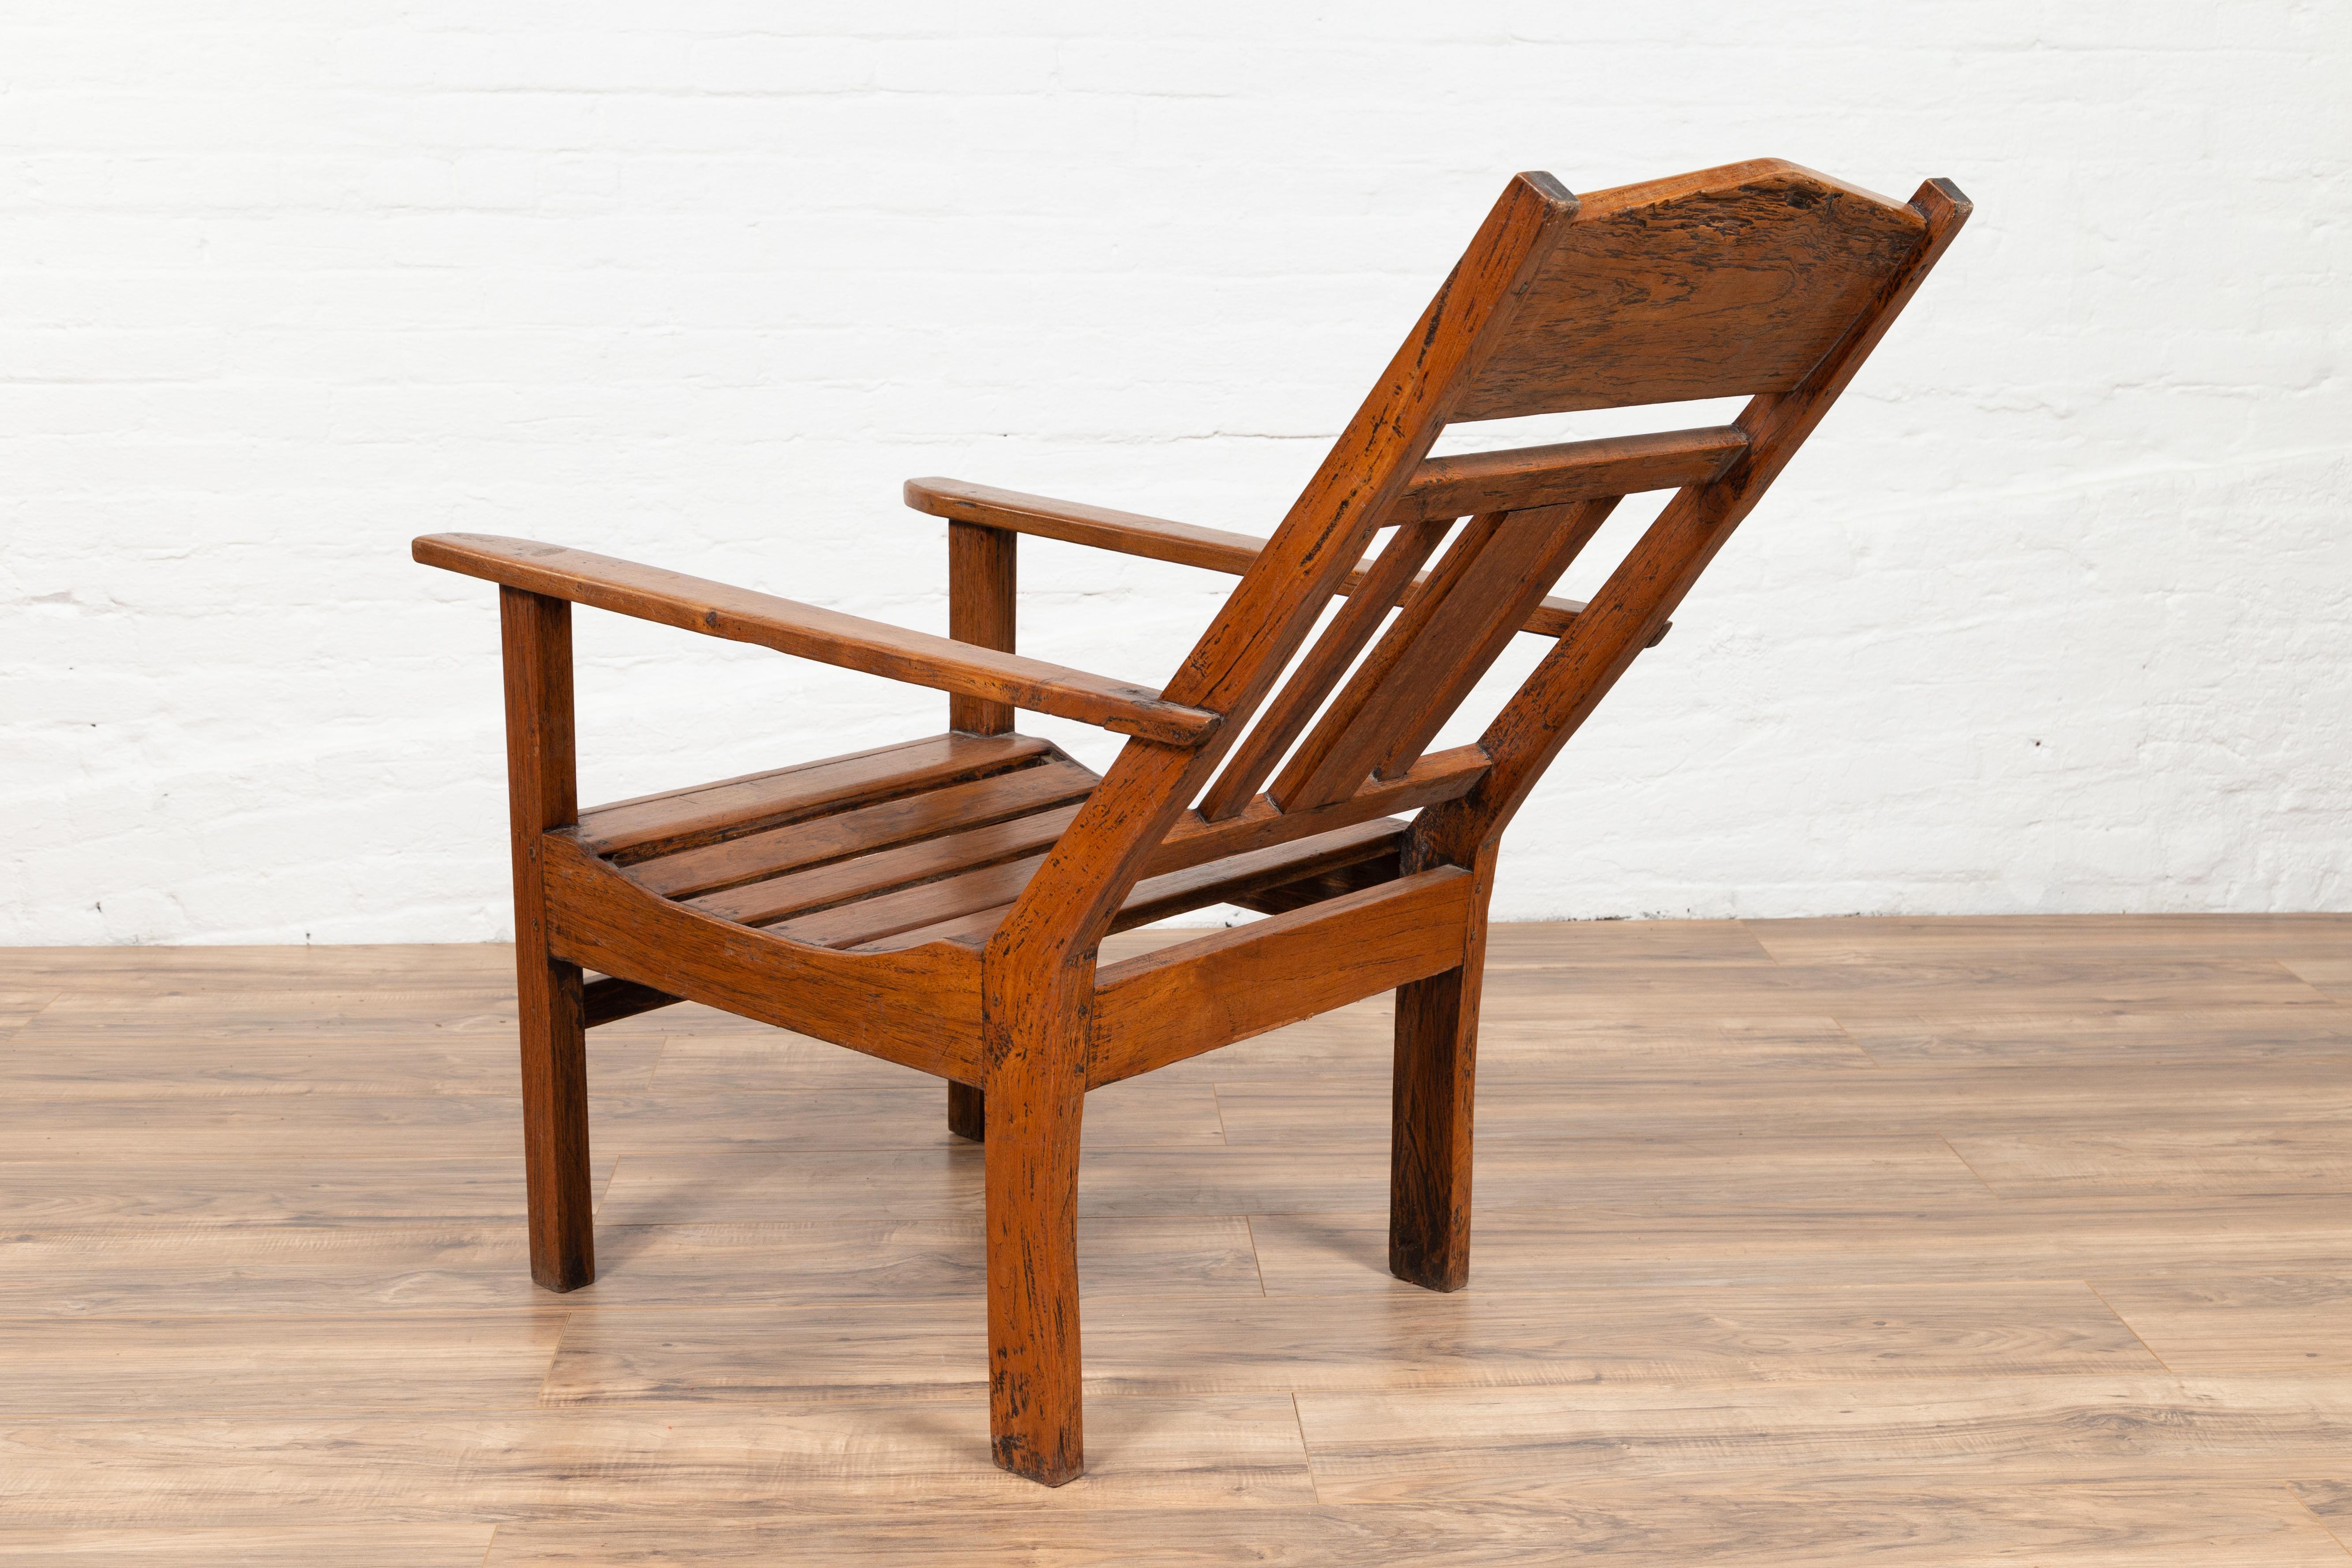 Javanese Vintage Dutch Colonial Plantation Wooden Lounge Chair with Slanted Back For Sale 3